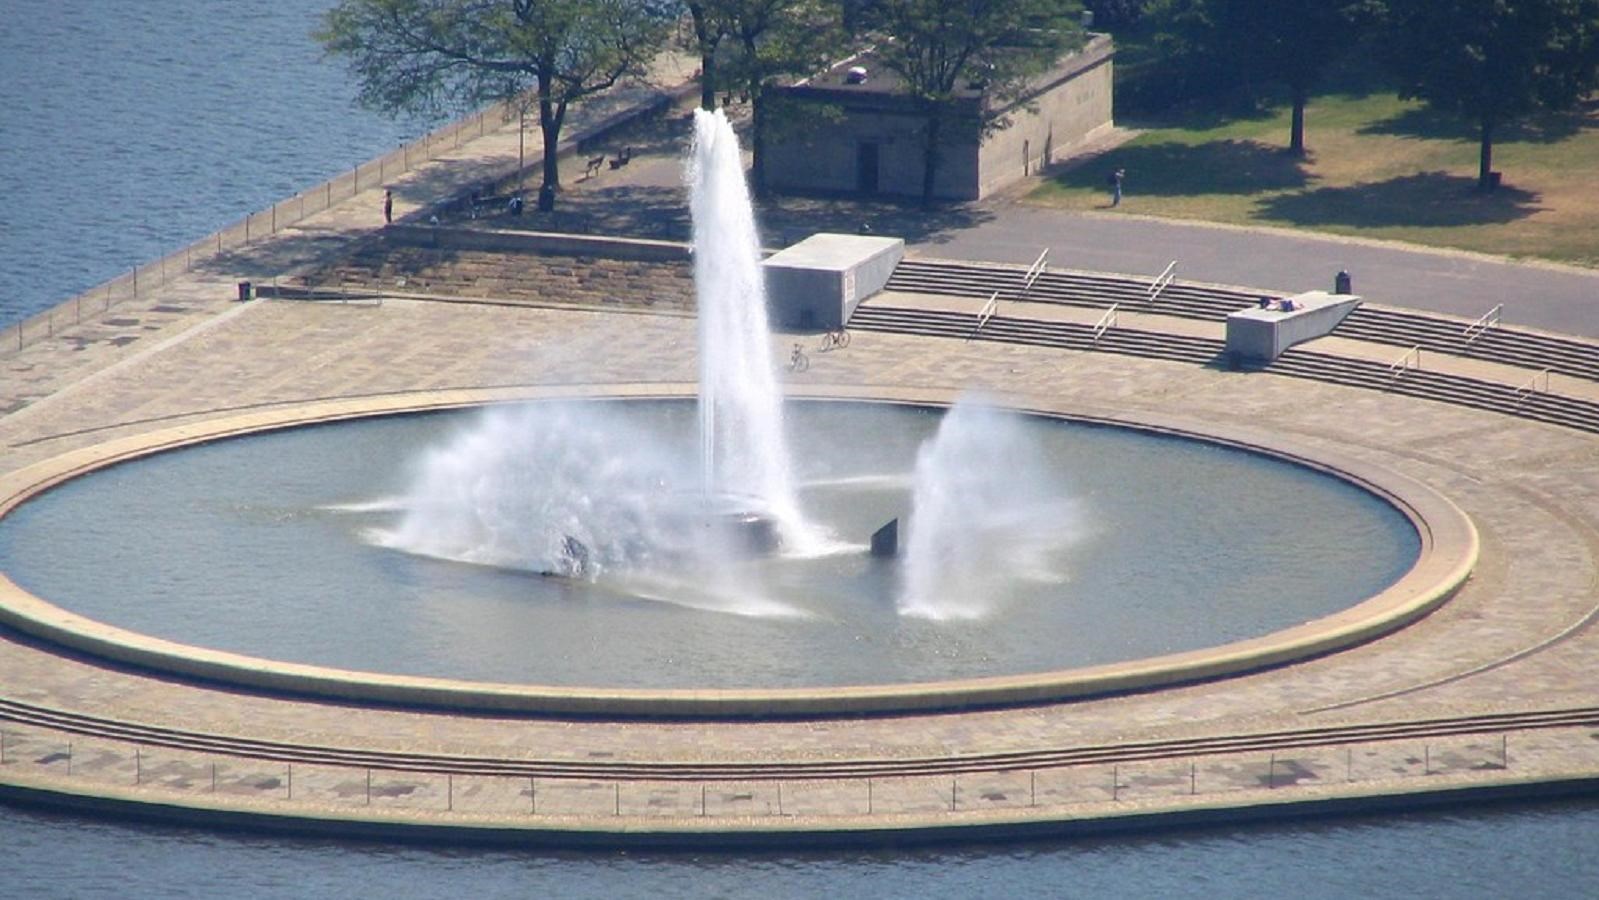 A large circular fountain sprays water into the air